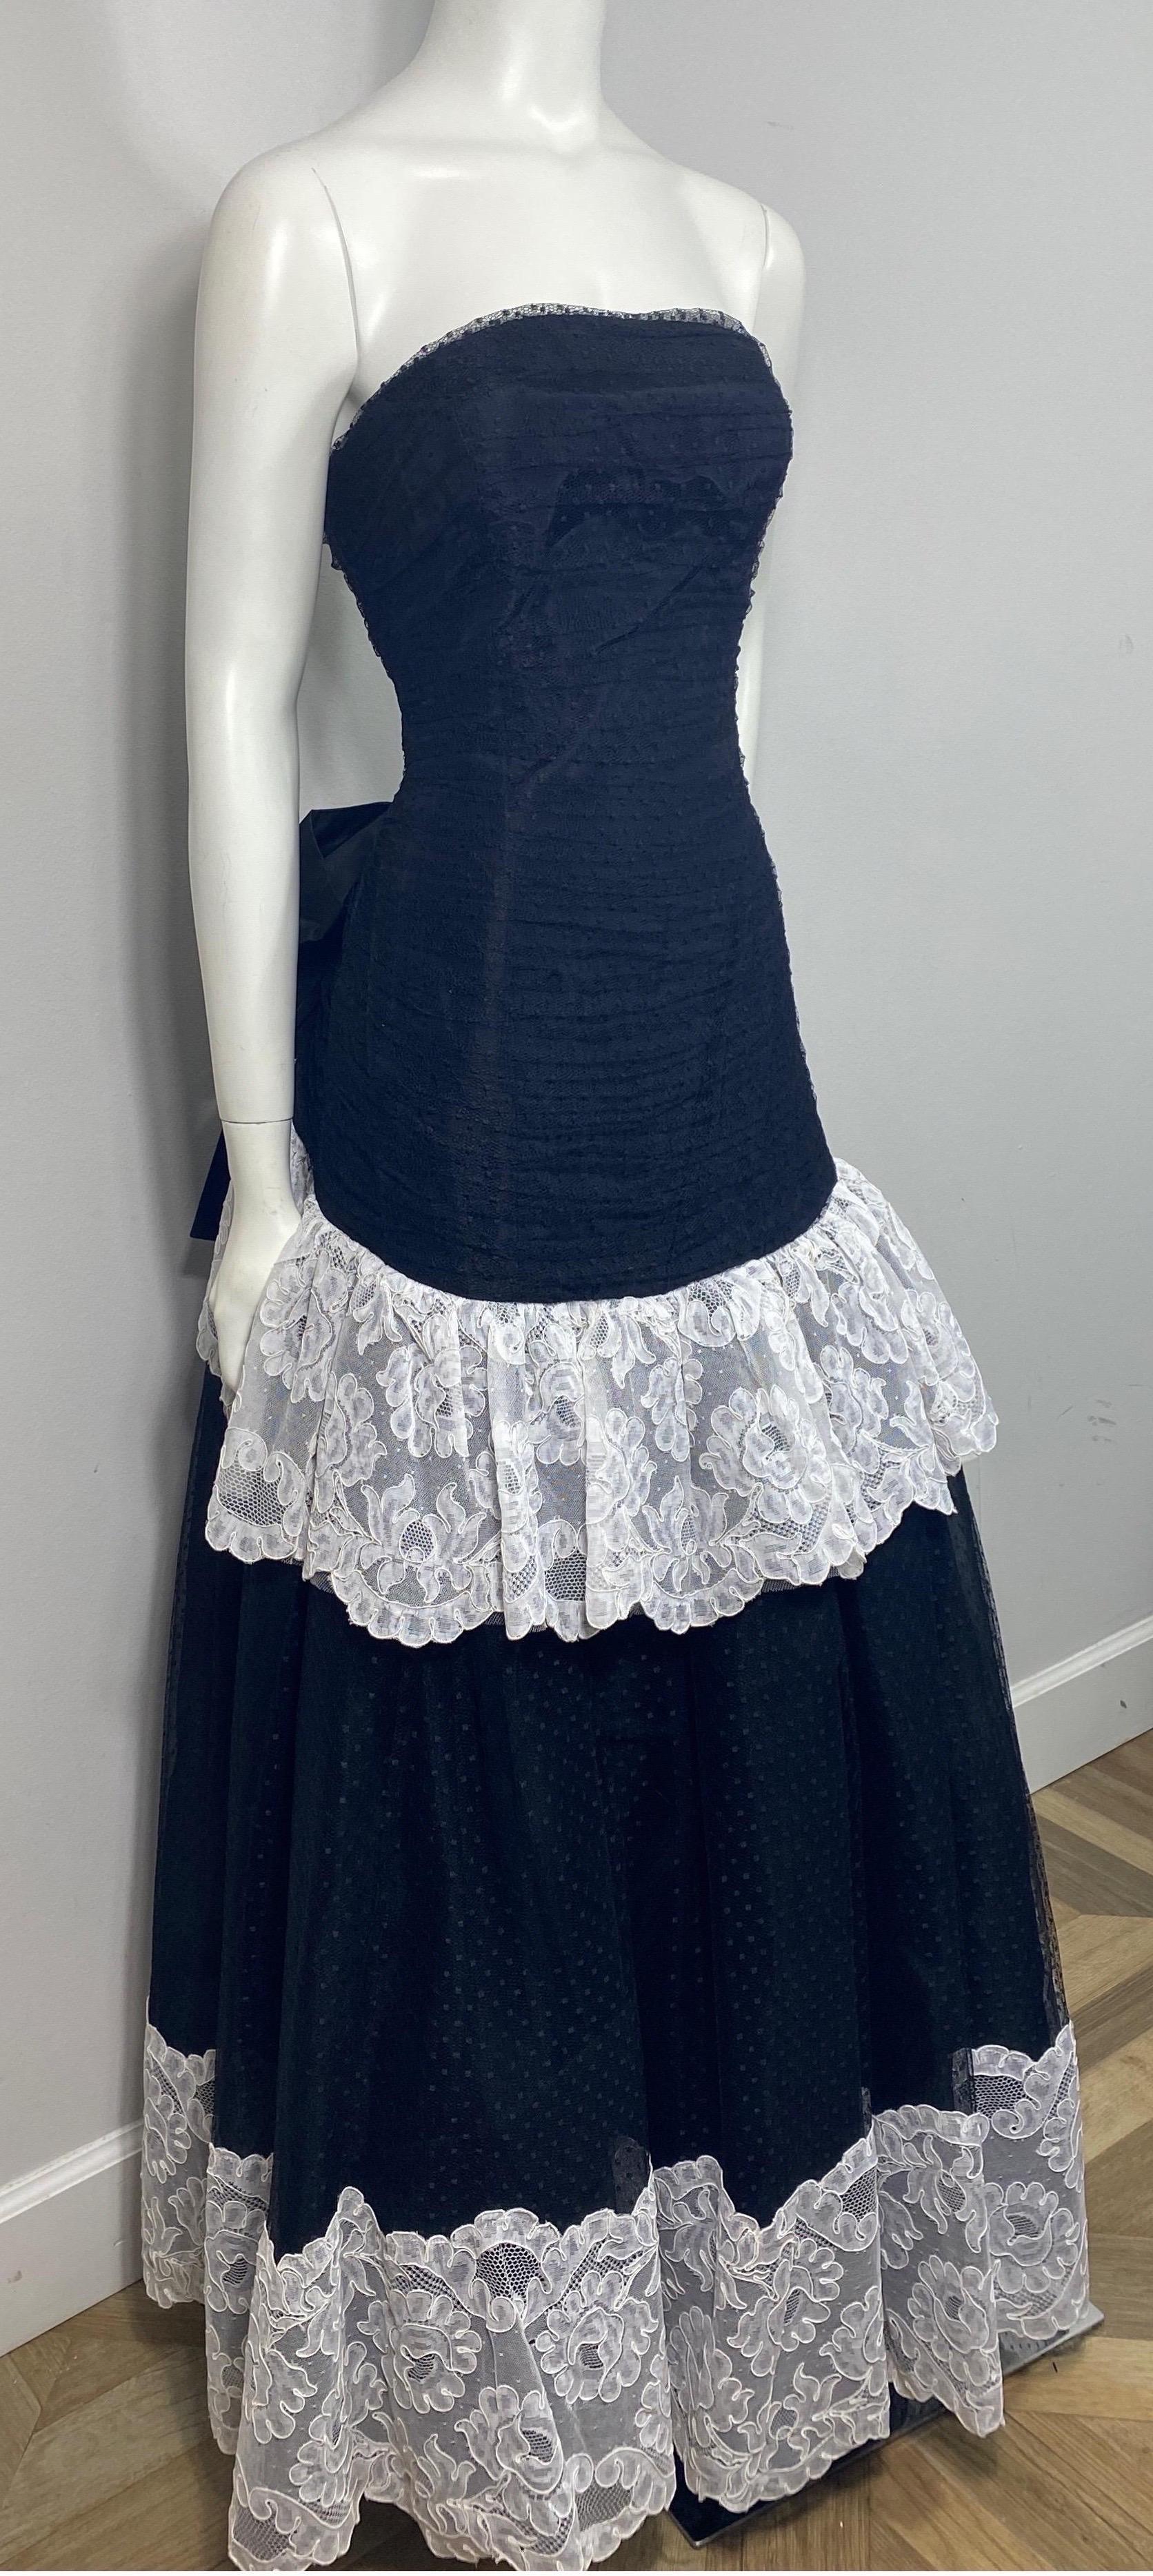 Bellville Sassoon Late 1980’s Black and White Point D’Esprit Gown - Size 8 In Excellent Condition For Sale In West Palm Beach, FL